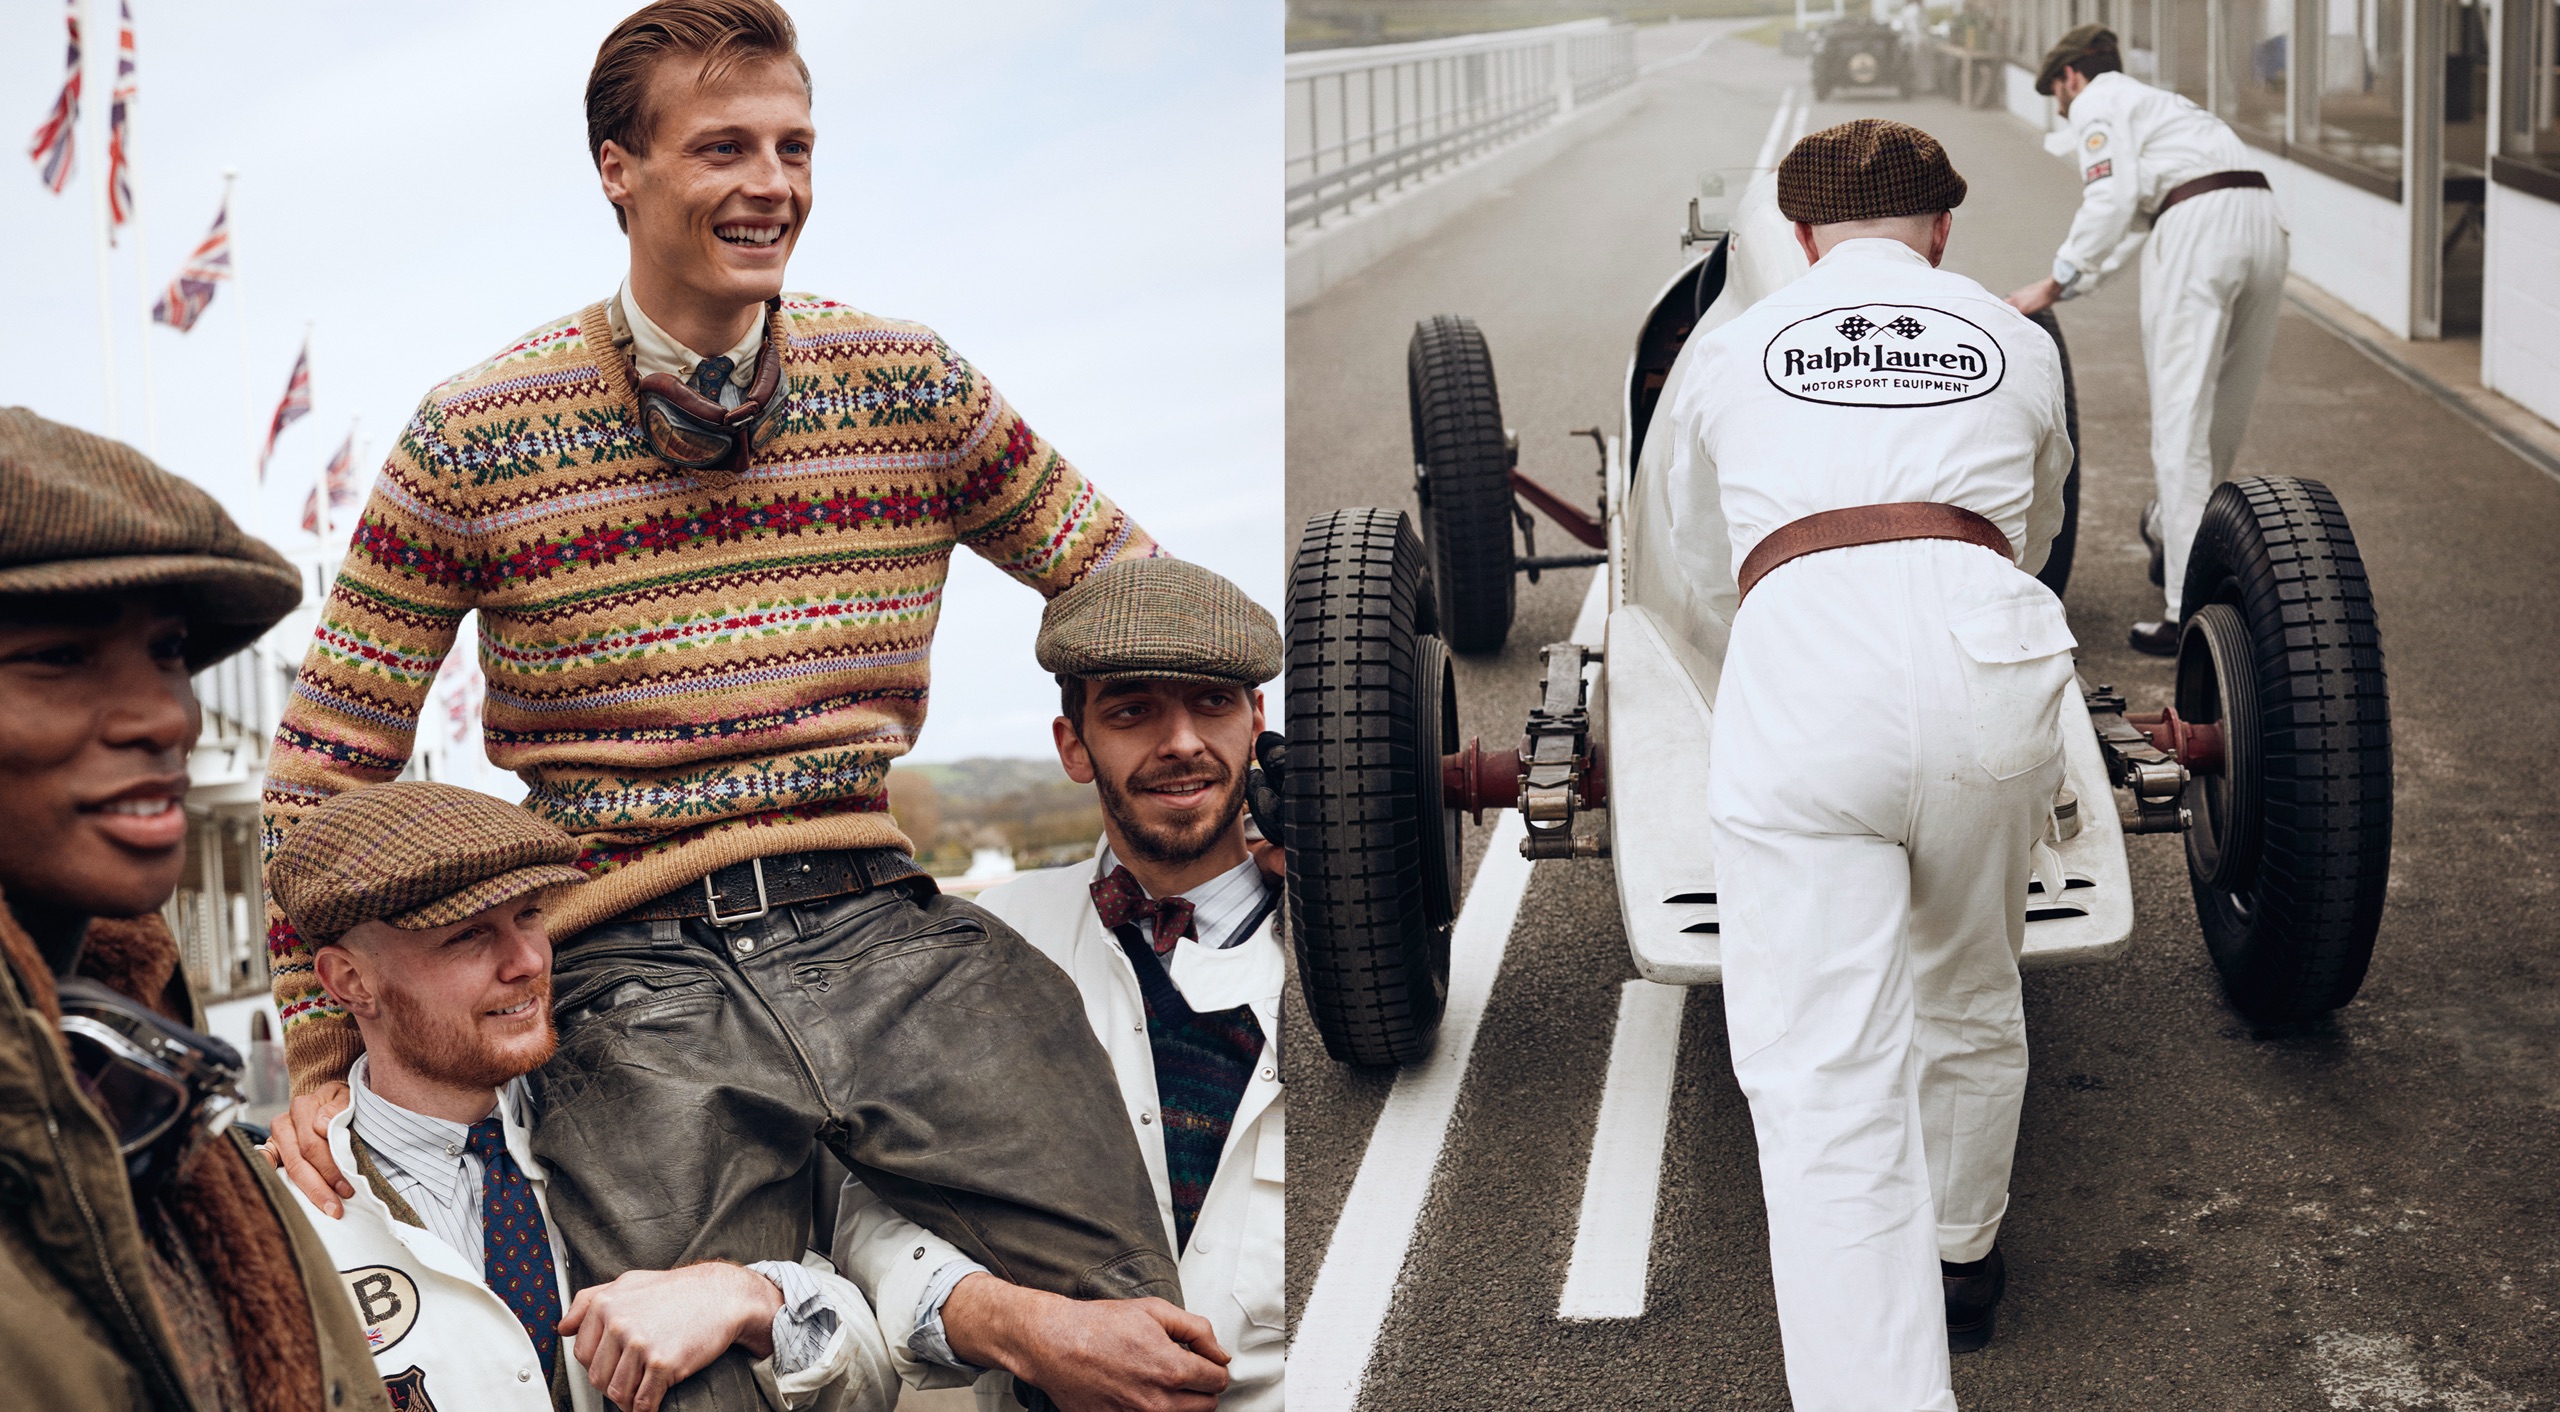 <strong>ON LOCATION</strong><br/><span>This season of Polo Originals, inspired by the golden era of Grand Prix car racing, was photographed at the Goodwood Motor Circuit, which is located in West Sussex, on the 12,000-acre Goodwood Estate. The Circuit has since become known for hosting a number of prestigious motorsport events, including the famous Festival of Speed and Revival.</span> <br/><rlmag_link href="https://www.ralphlauren.global/gi/en/search?cgid=brands-prl-tough-and-refined-cg"><button class="shop-collection">Shop the Story</button></rlmag_link>